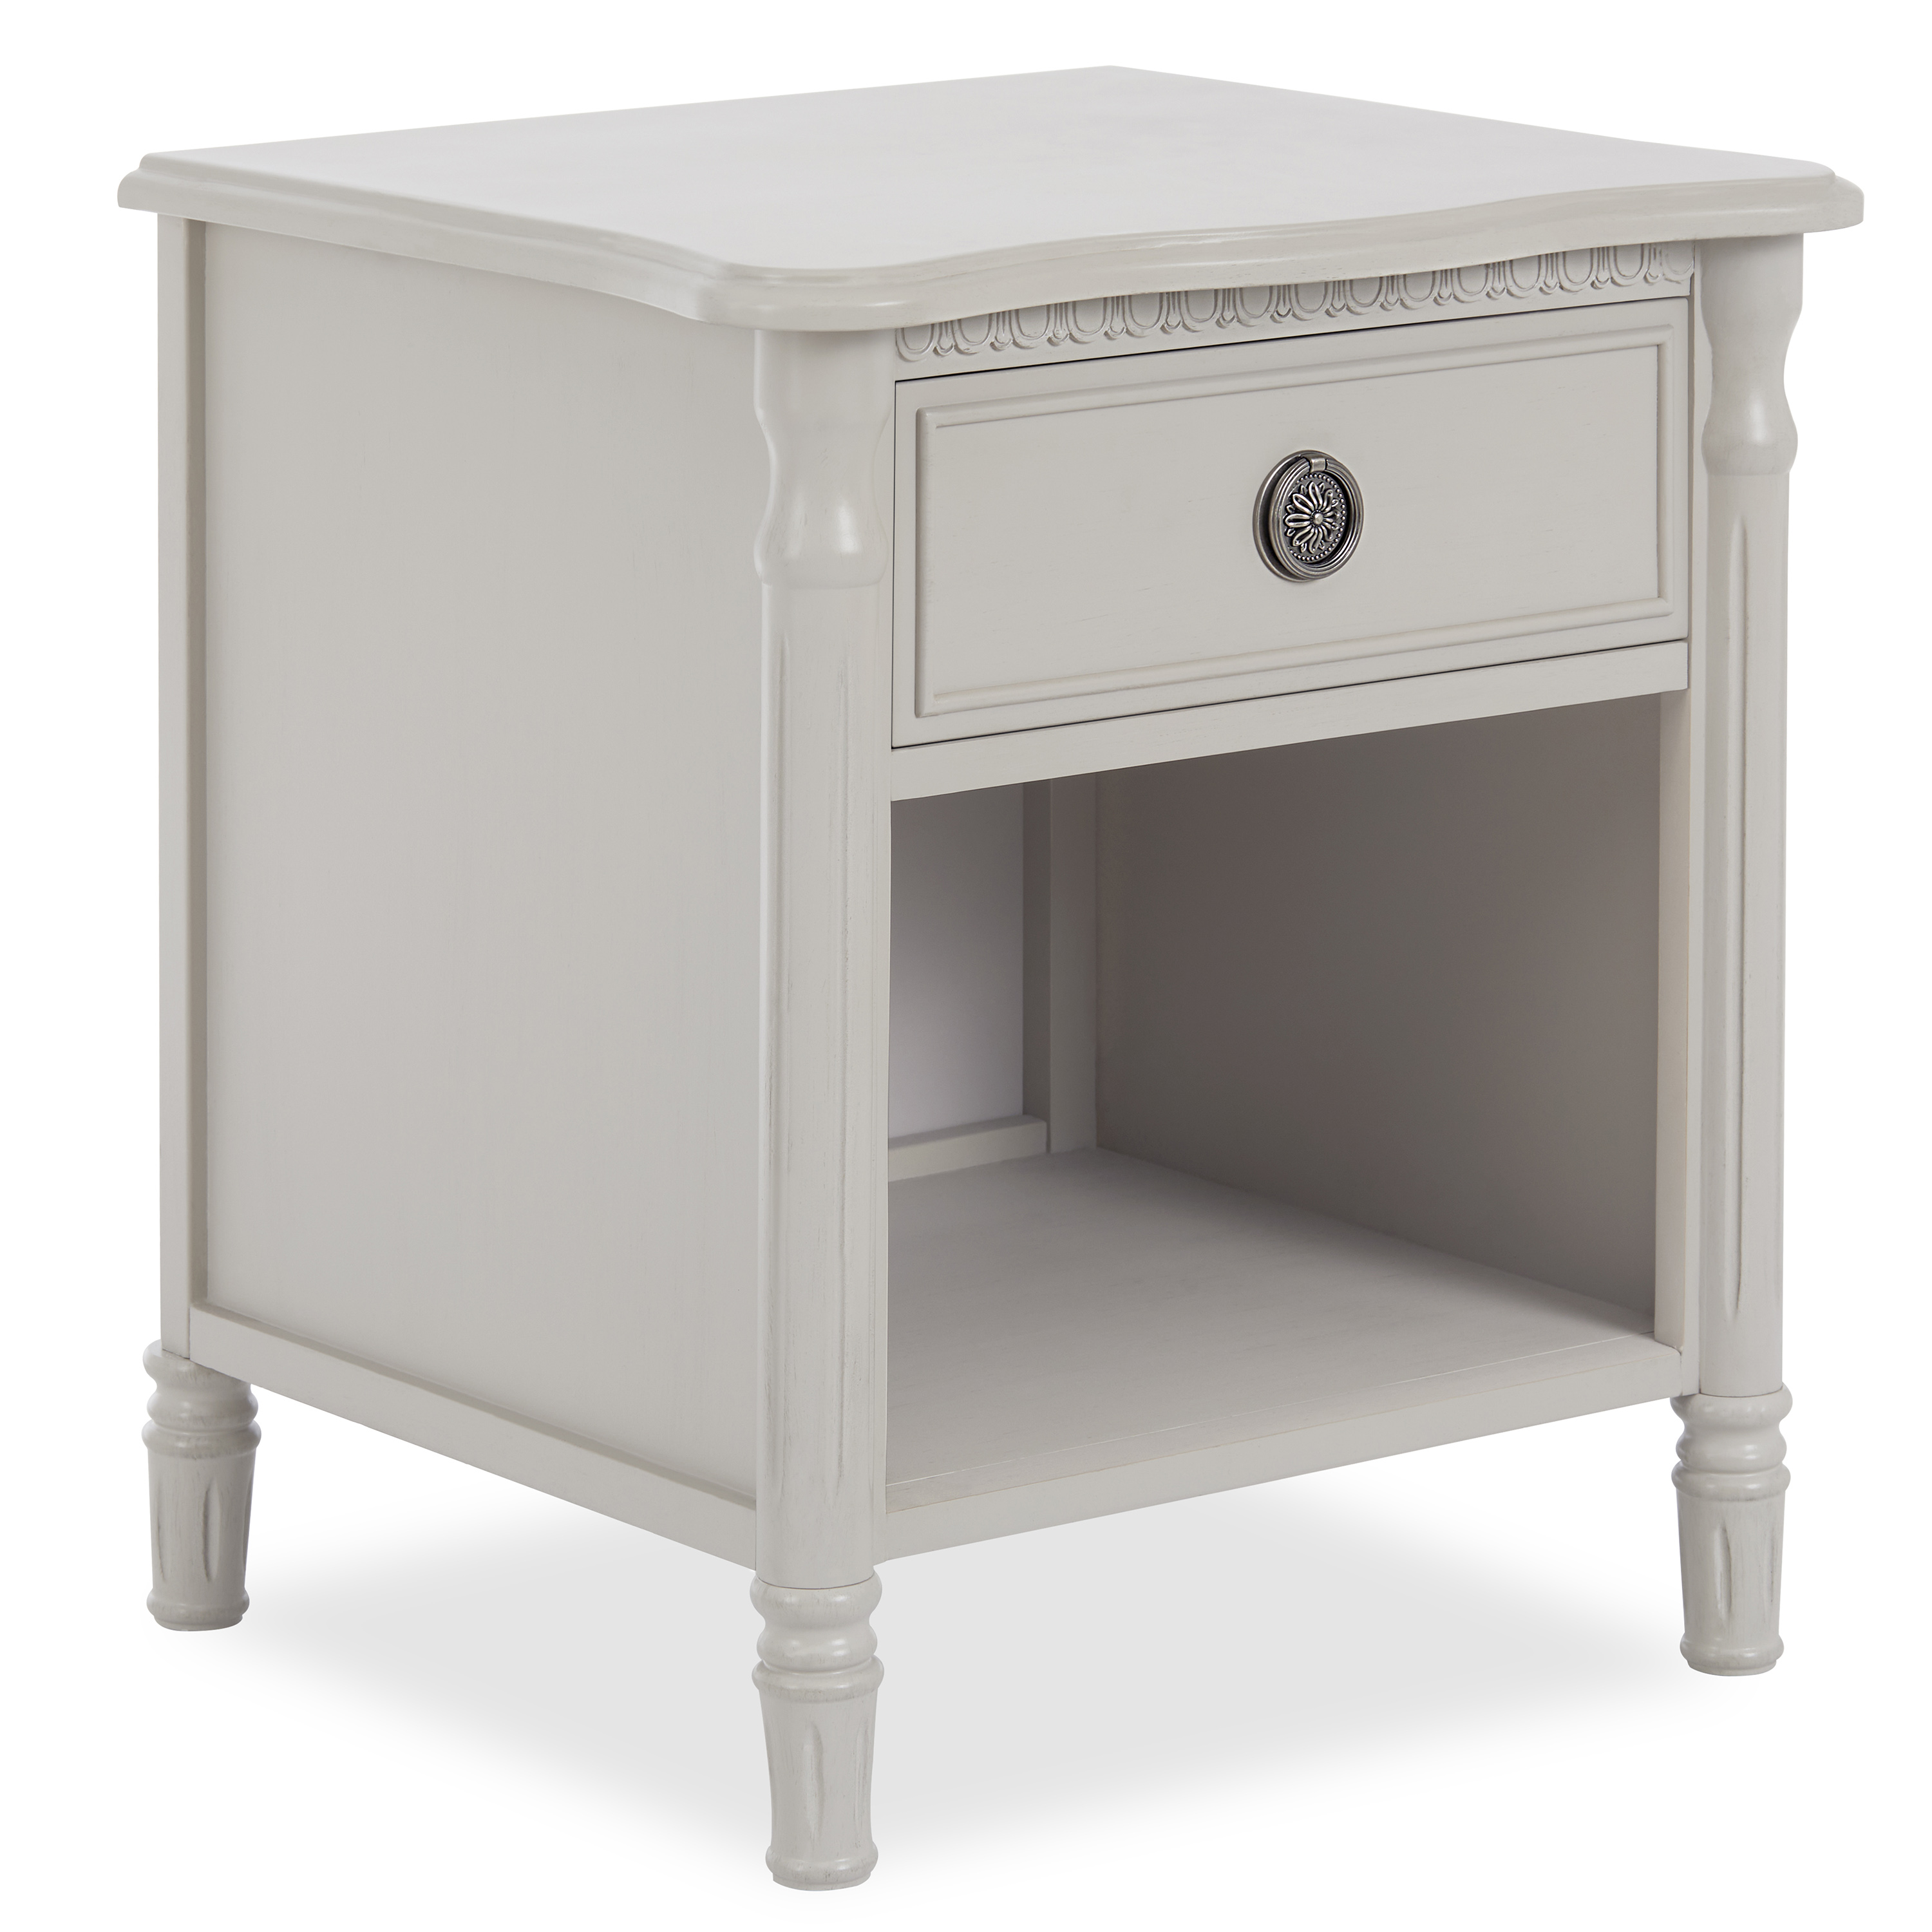 Evolur Julienne Night Stand - Clay - image 1 of 3